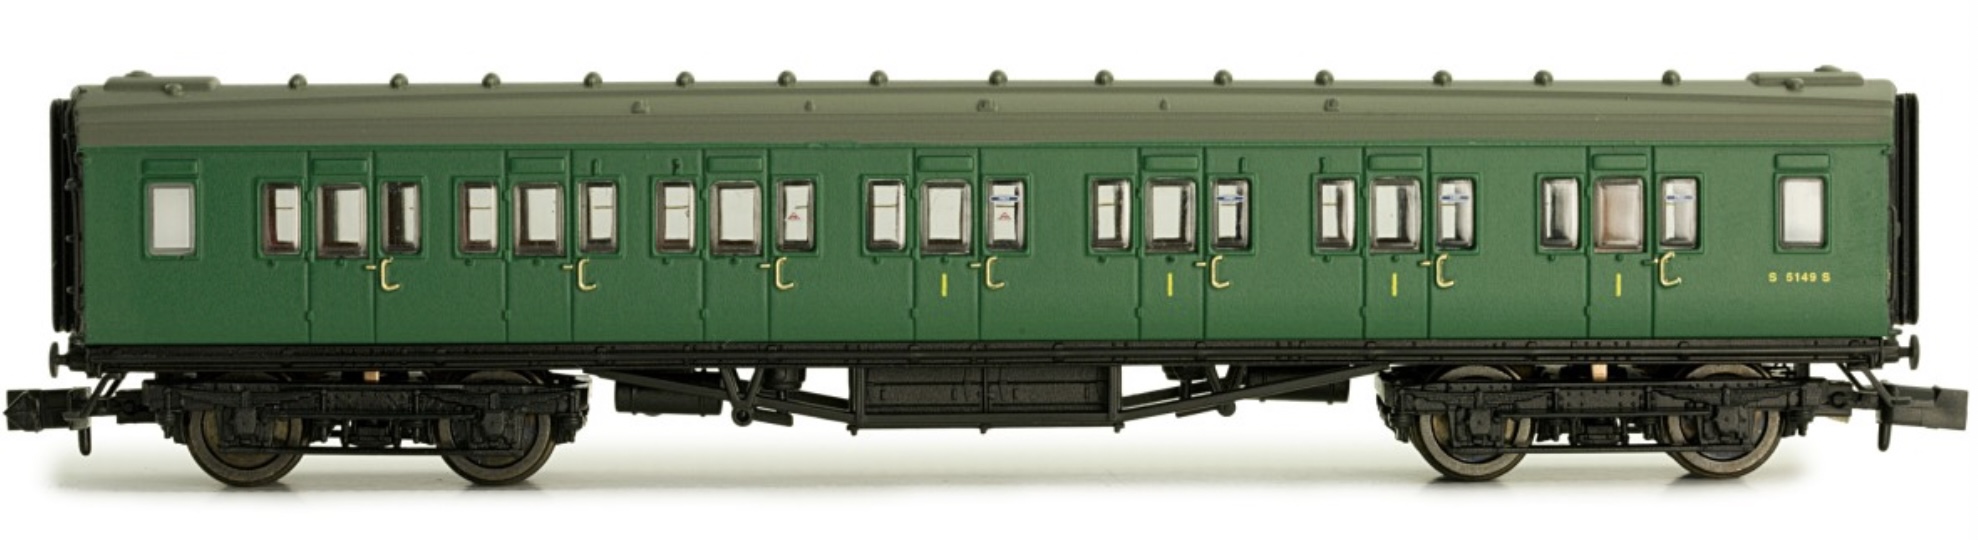 N Scale - Dapol - 2P-012-454 - Passenger Car, Coach, Maunsell, Composite - Southern (UK) - 5149